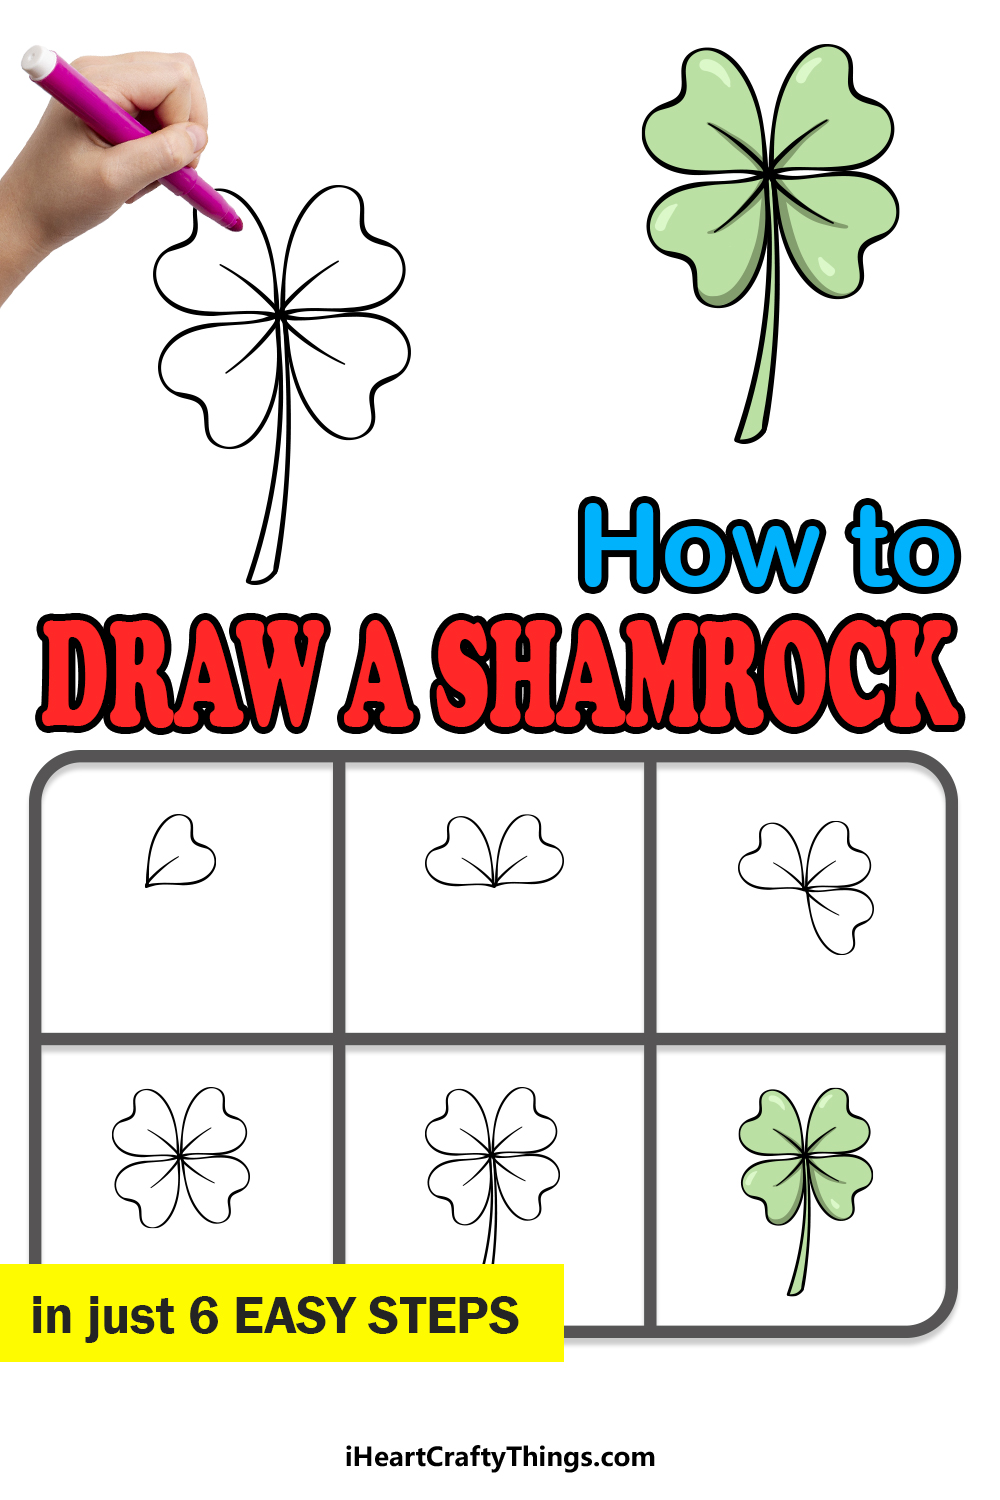 how to draw a shamrock in 6 easy steps